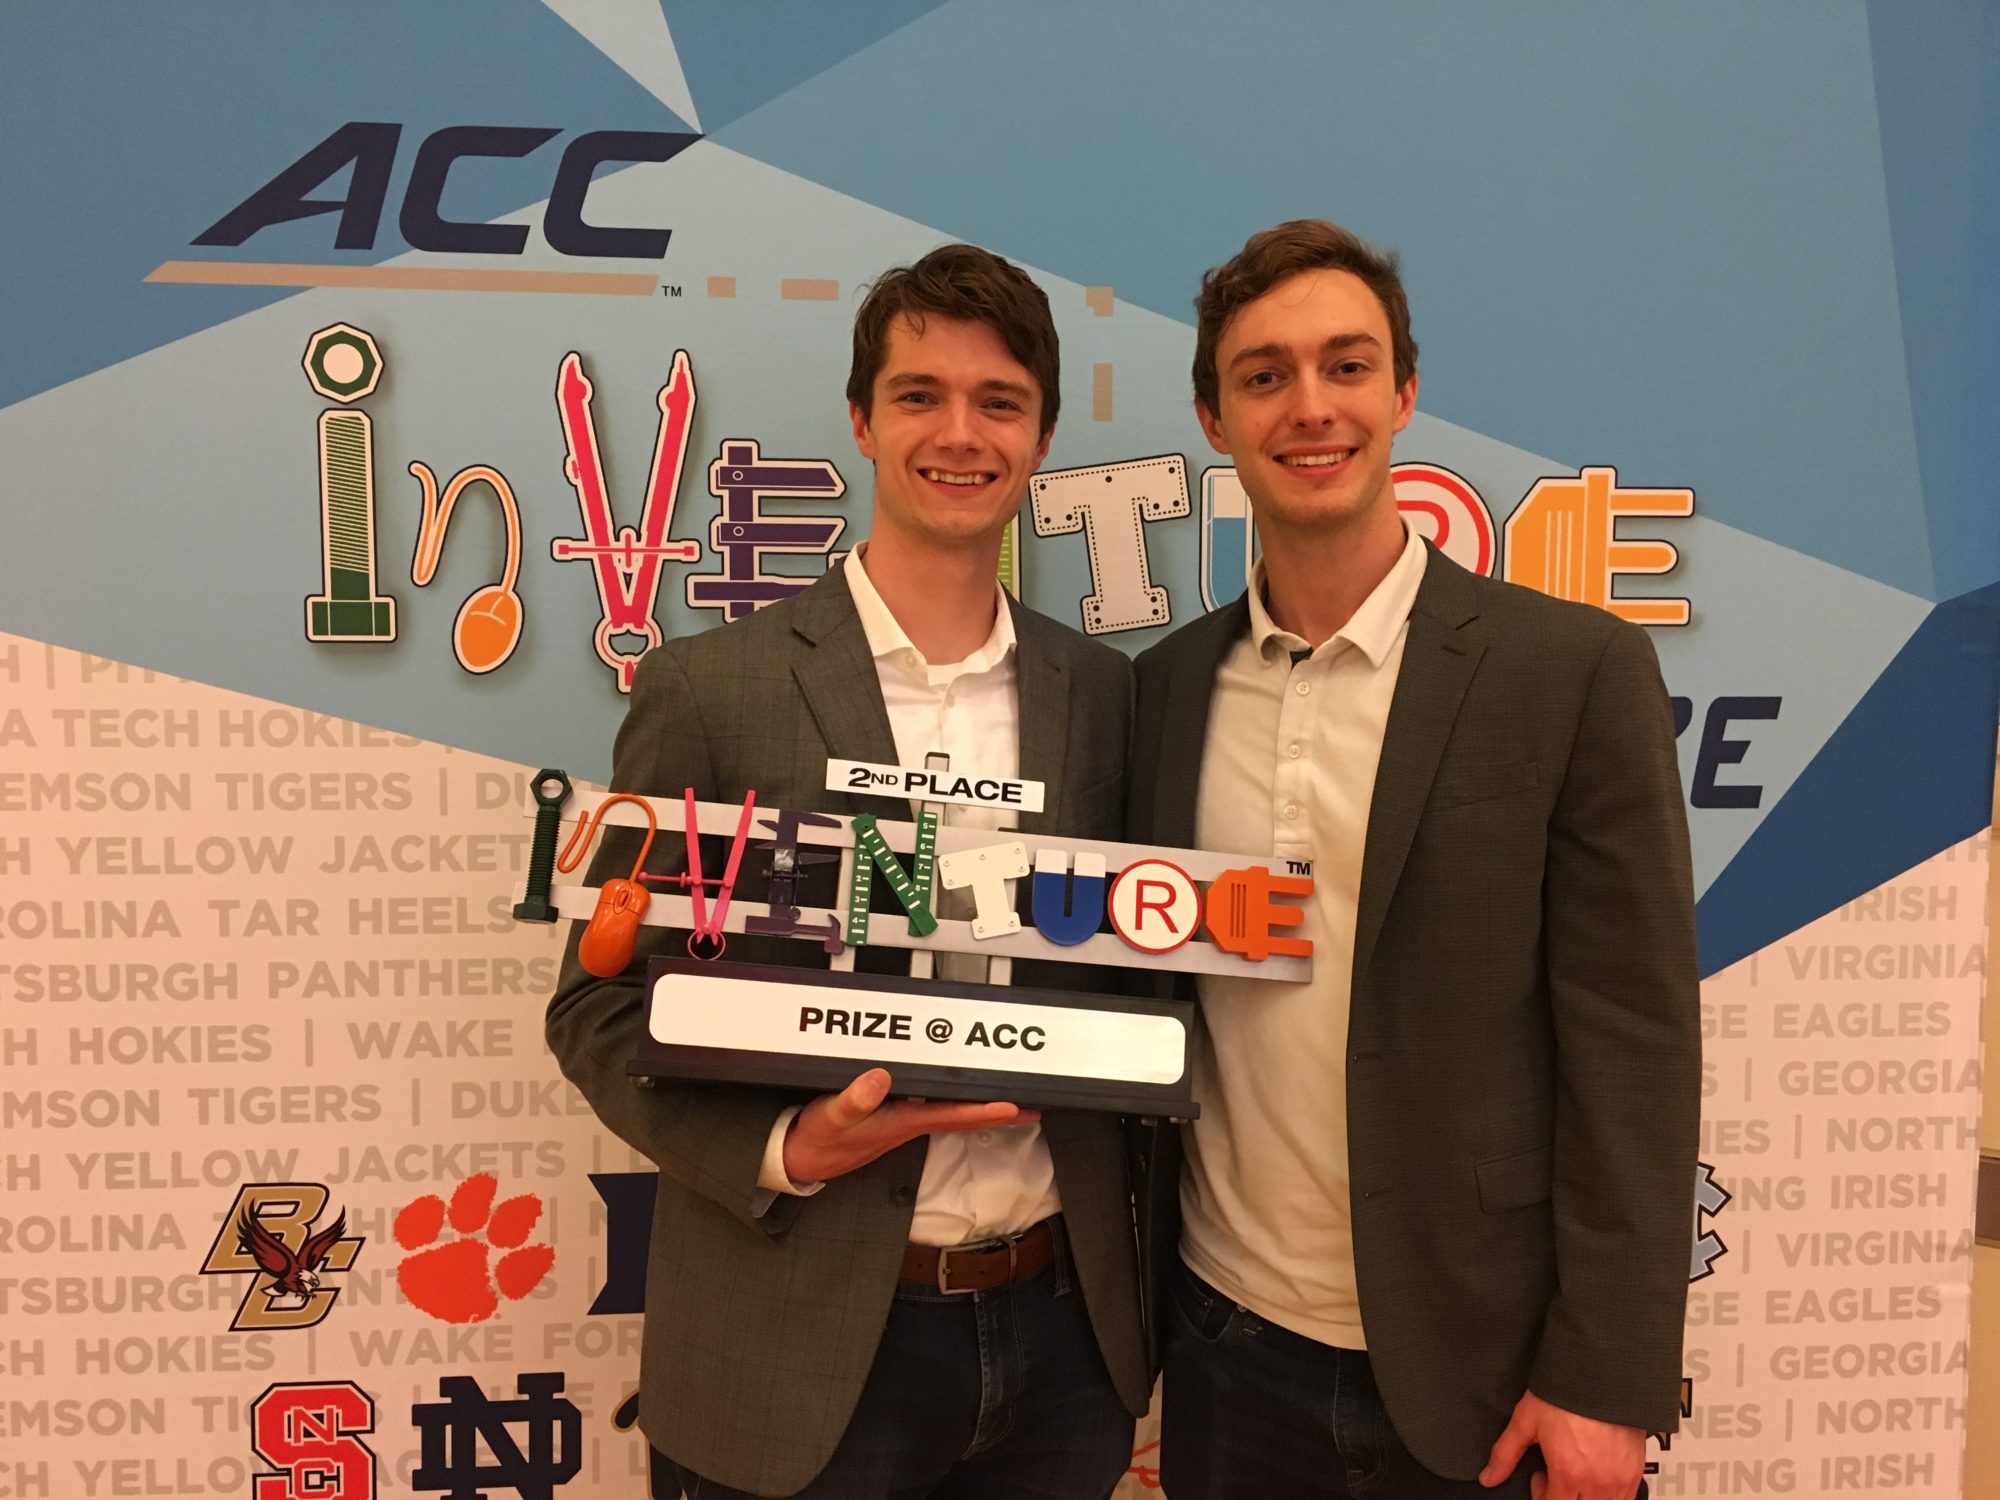 Quinn King and Alec Gillinder with ACC award